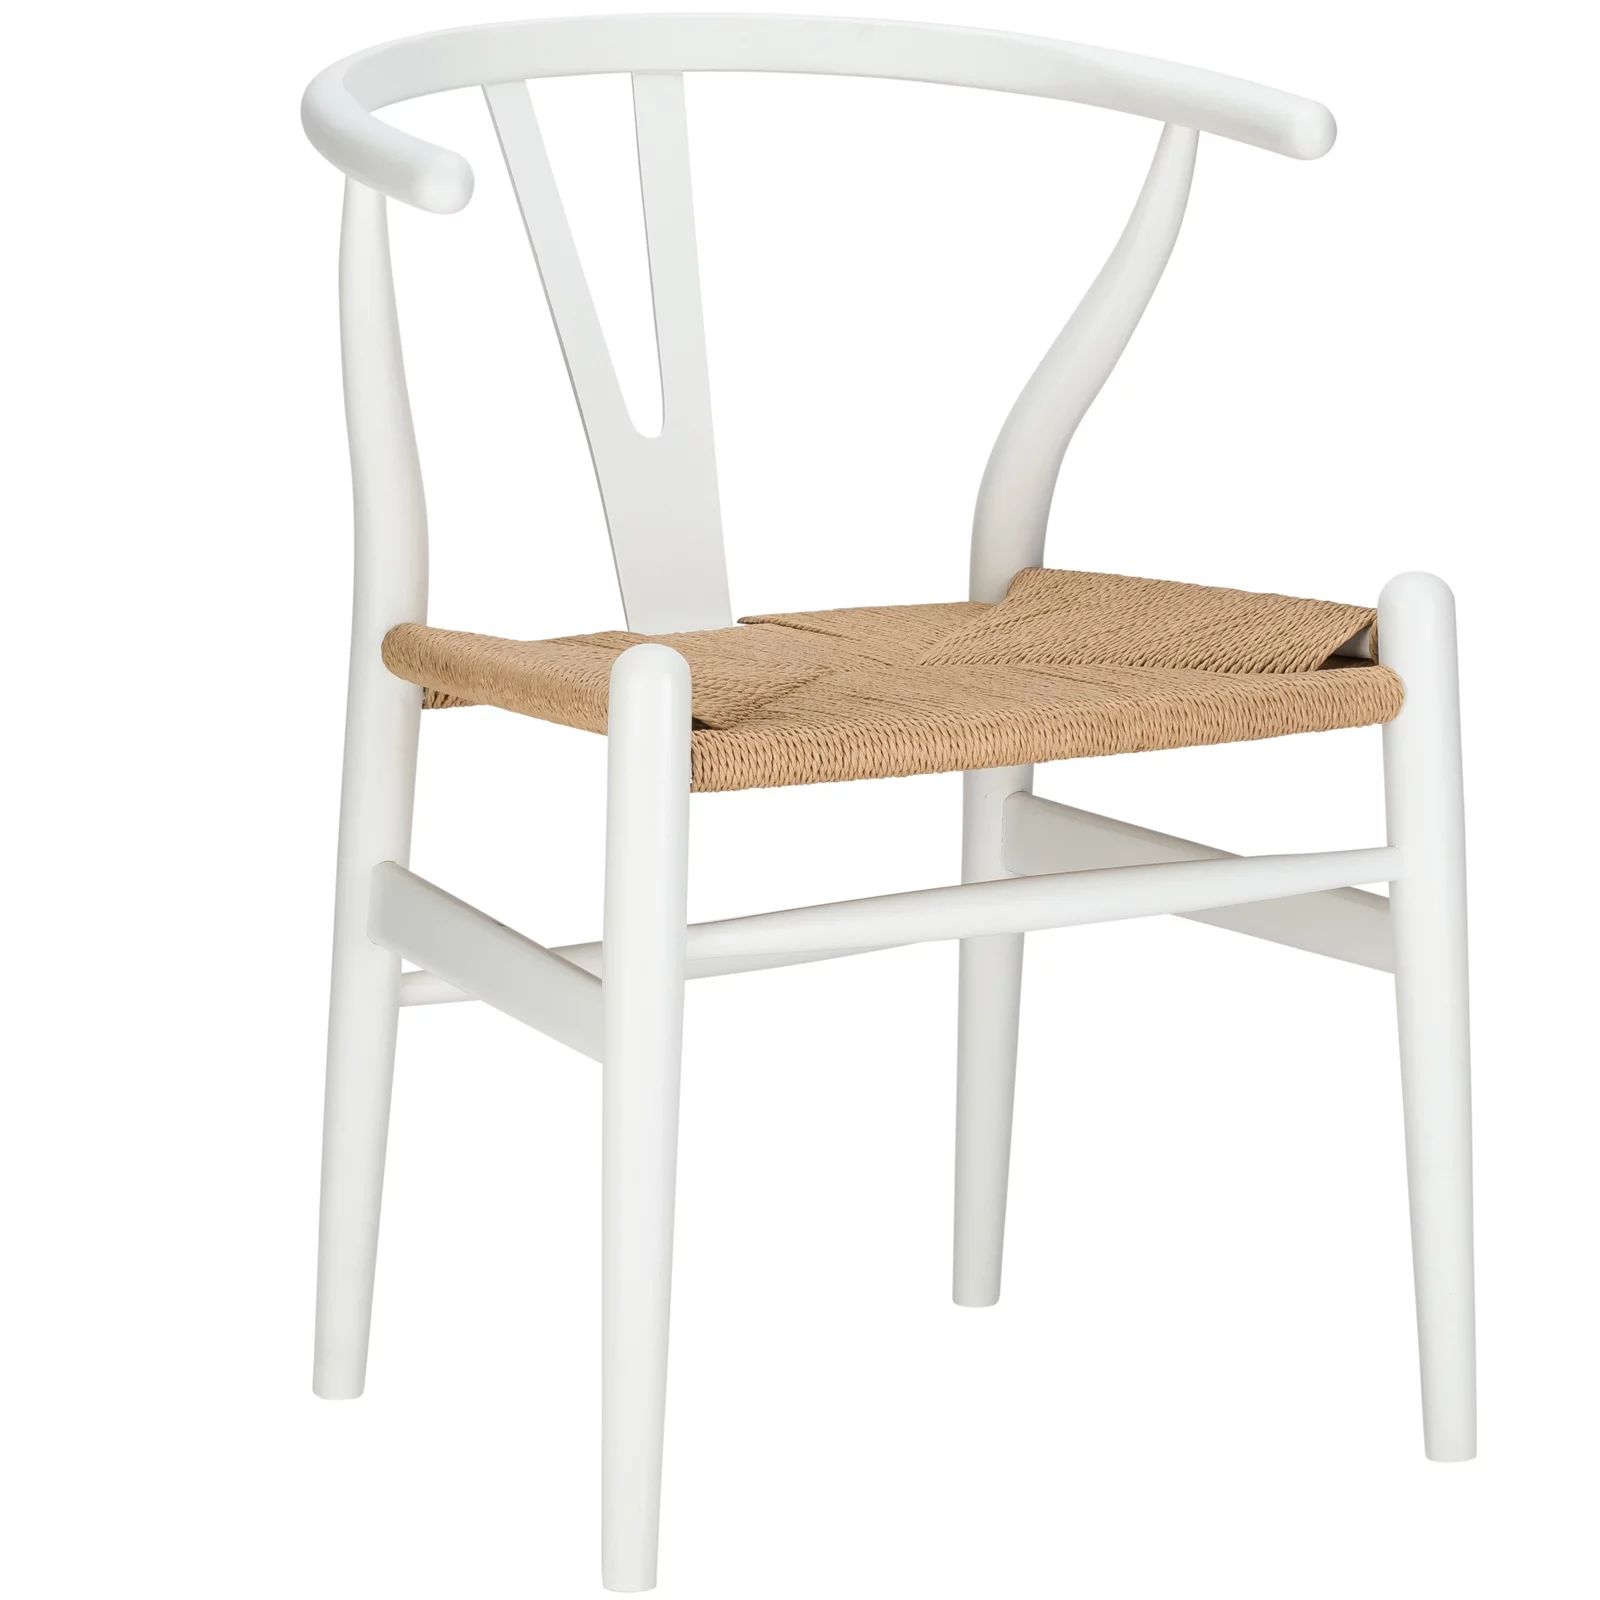 Poly & Bark Weave Chair in White | Walmart (US)